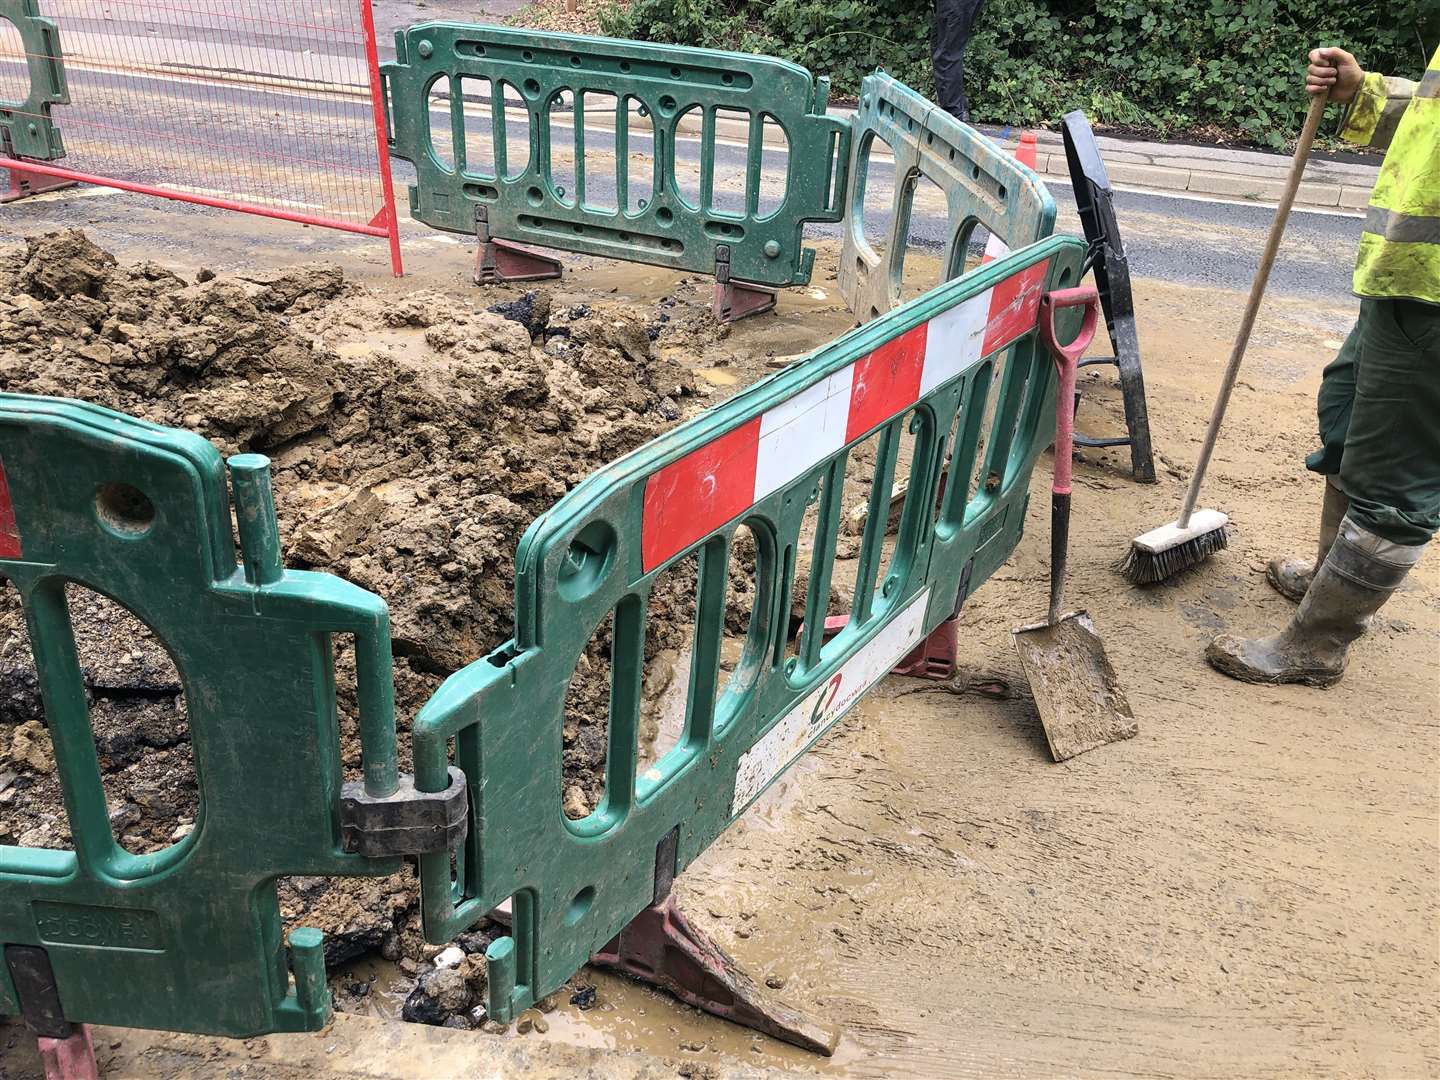 Work is ongoing to fix a burst water main in Ware Street, Bearsted (13829917)